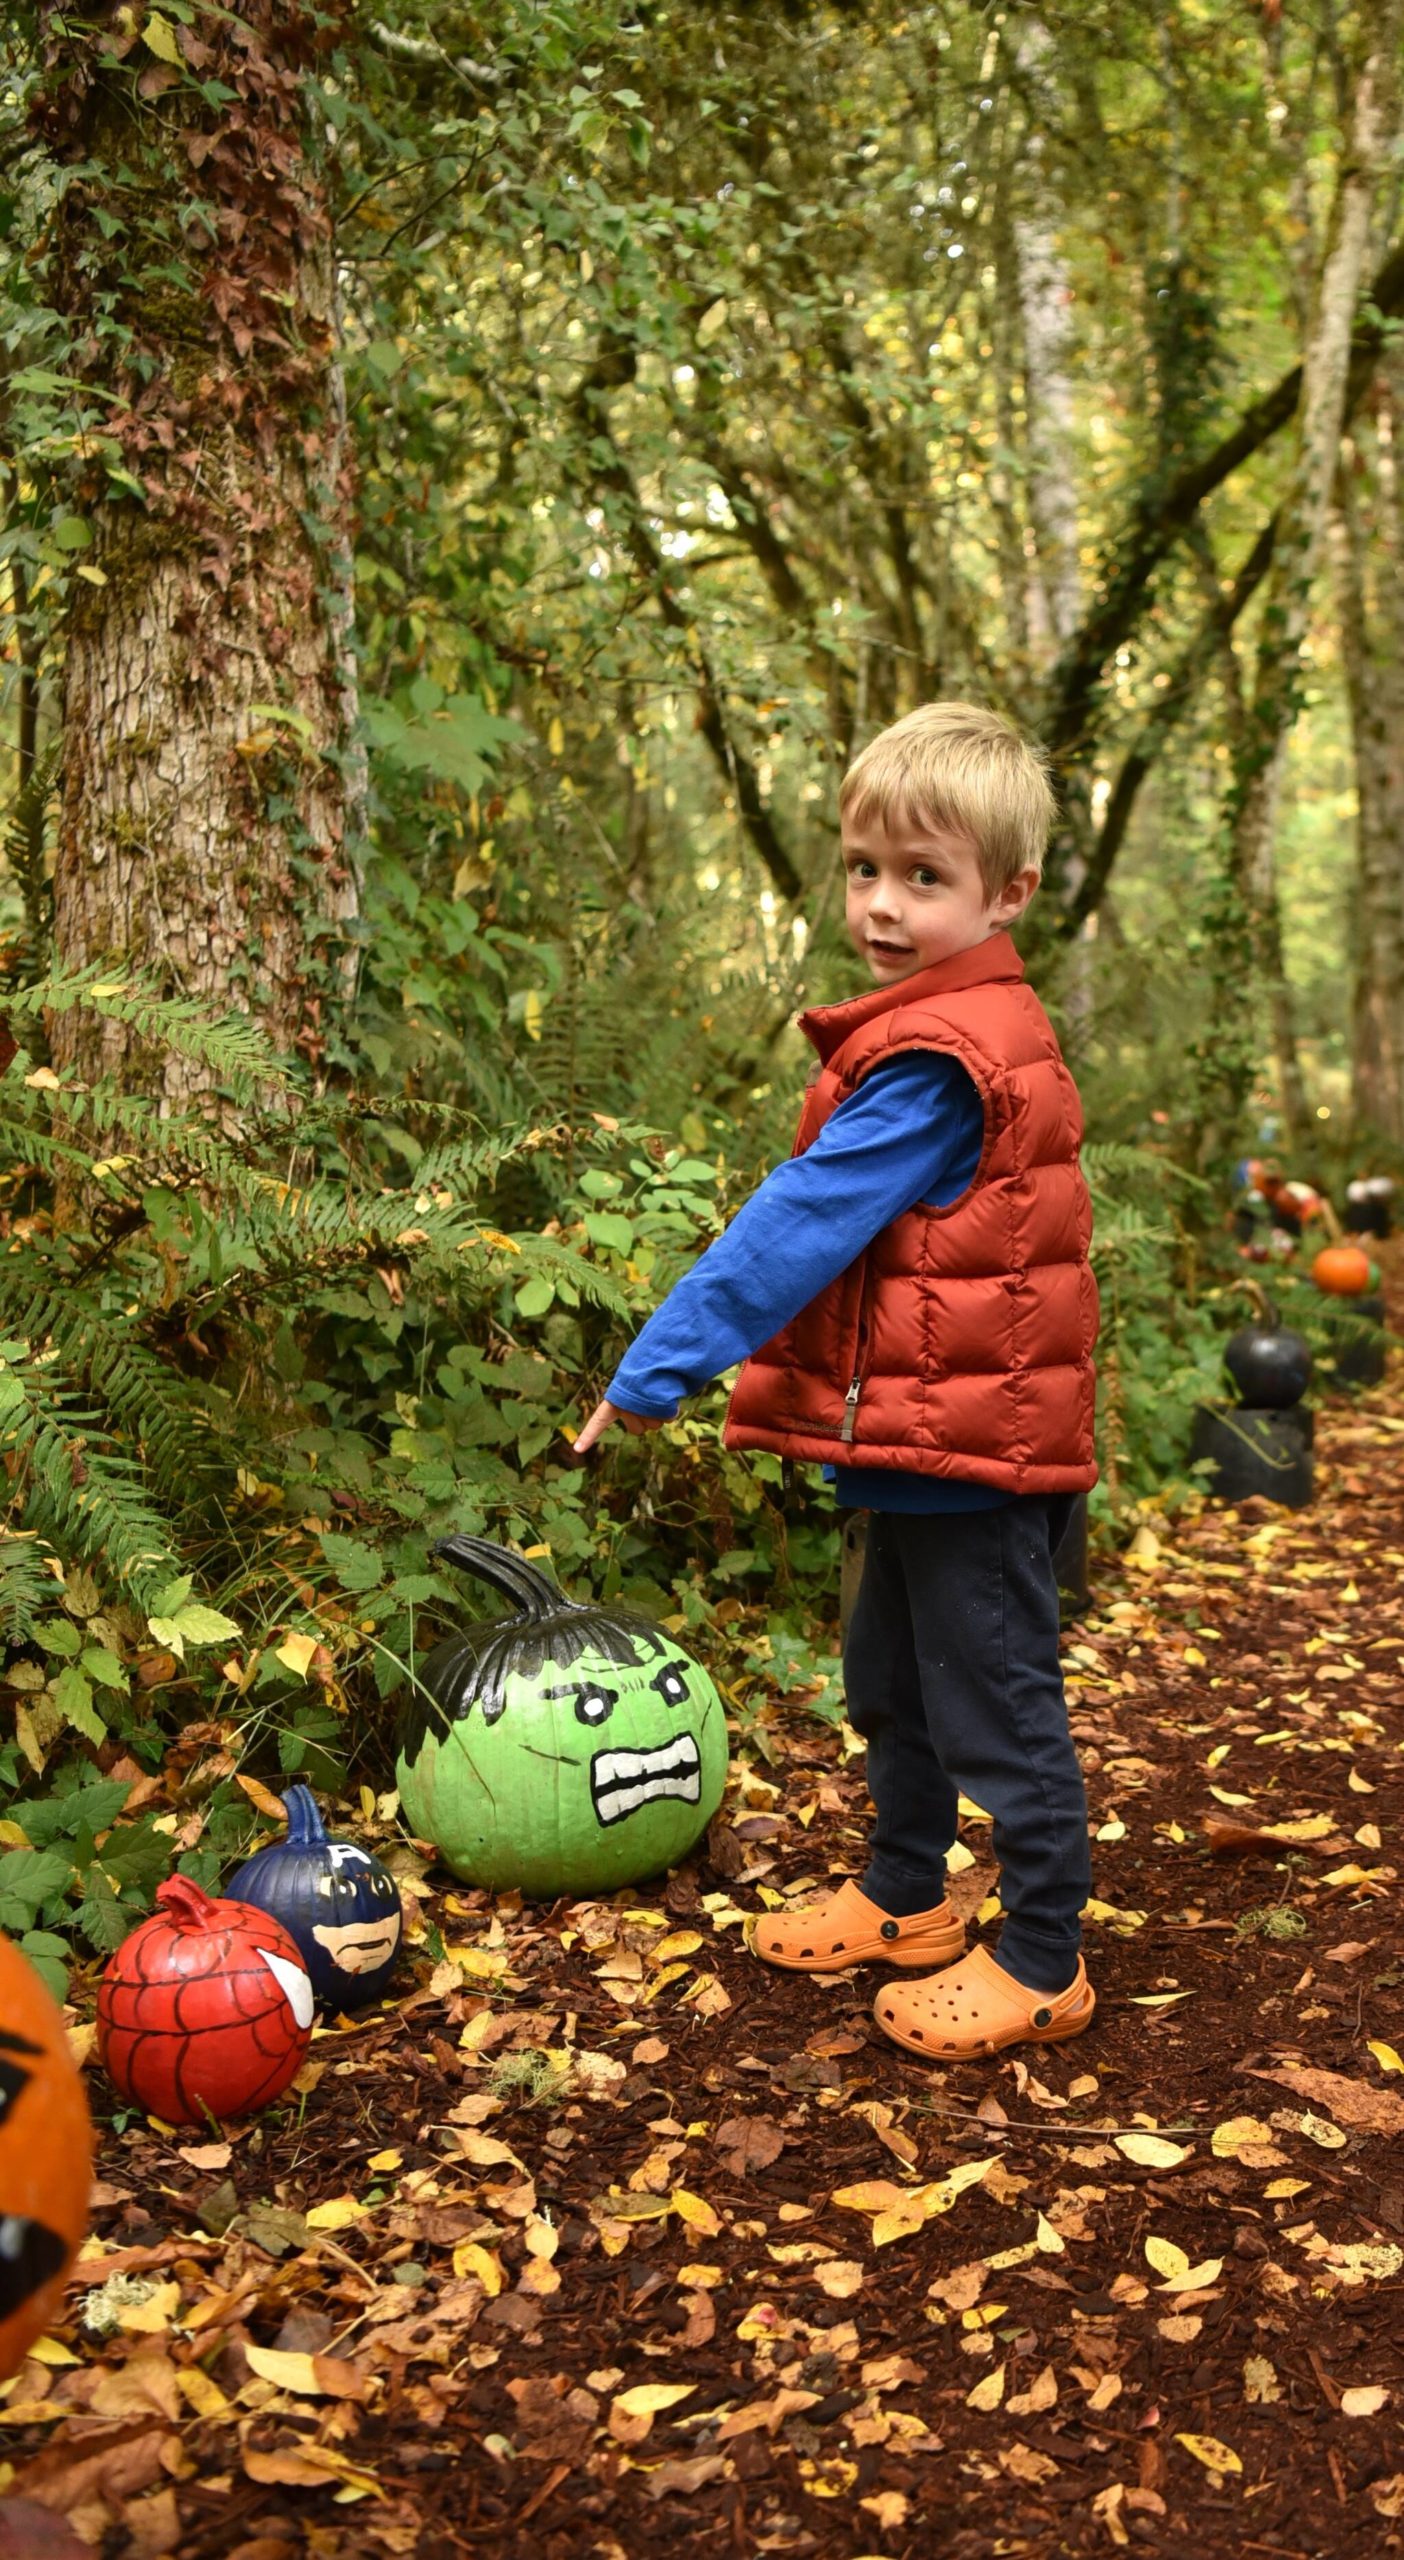 James DeWitt finds a Hulk pumpkin on the trail at Bainbridge Gardens Oct. 23. The business allows the community to place decorated pumpkins along the trail each Halloween for all to enjoy.